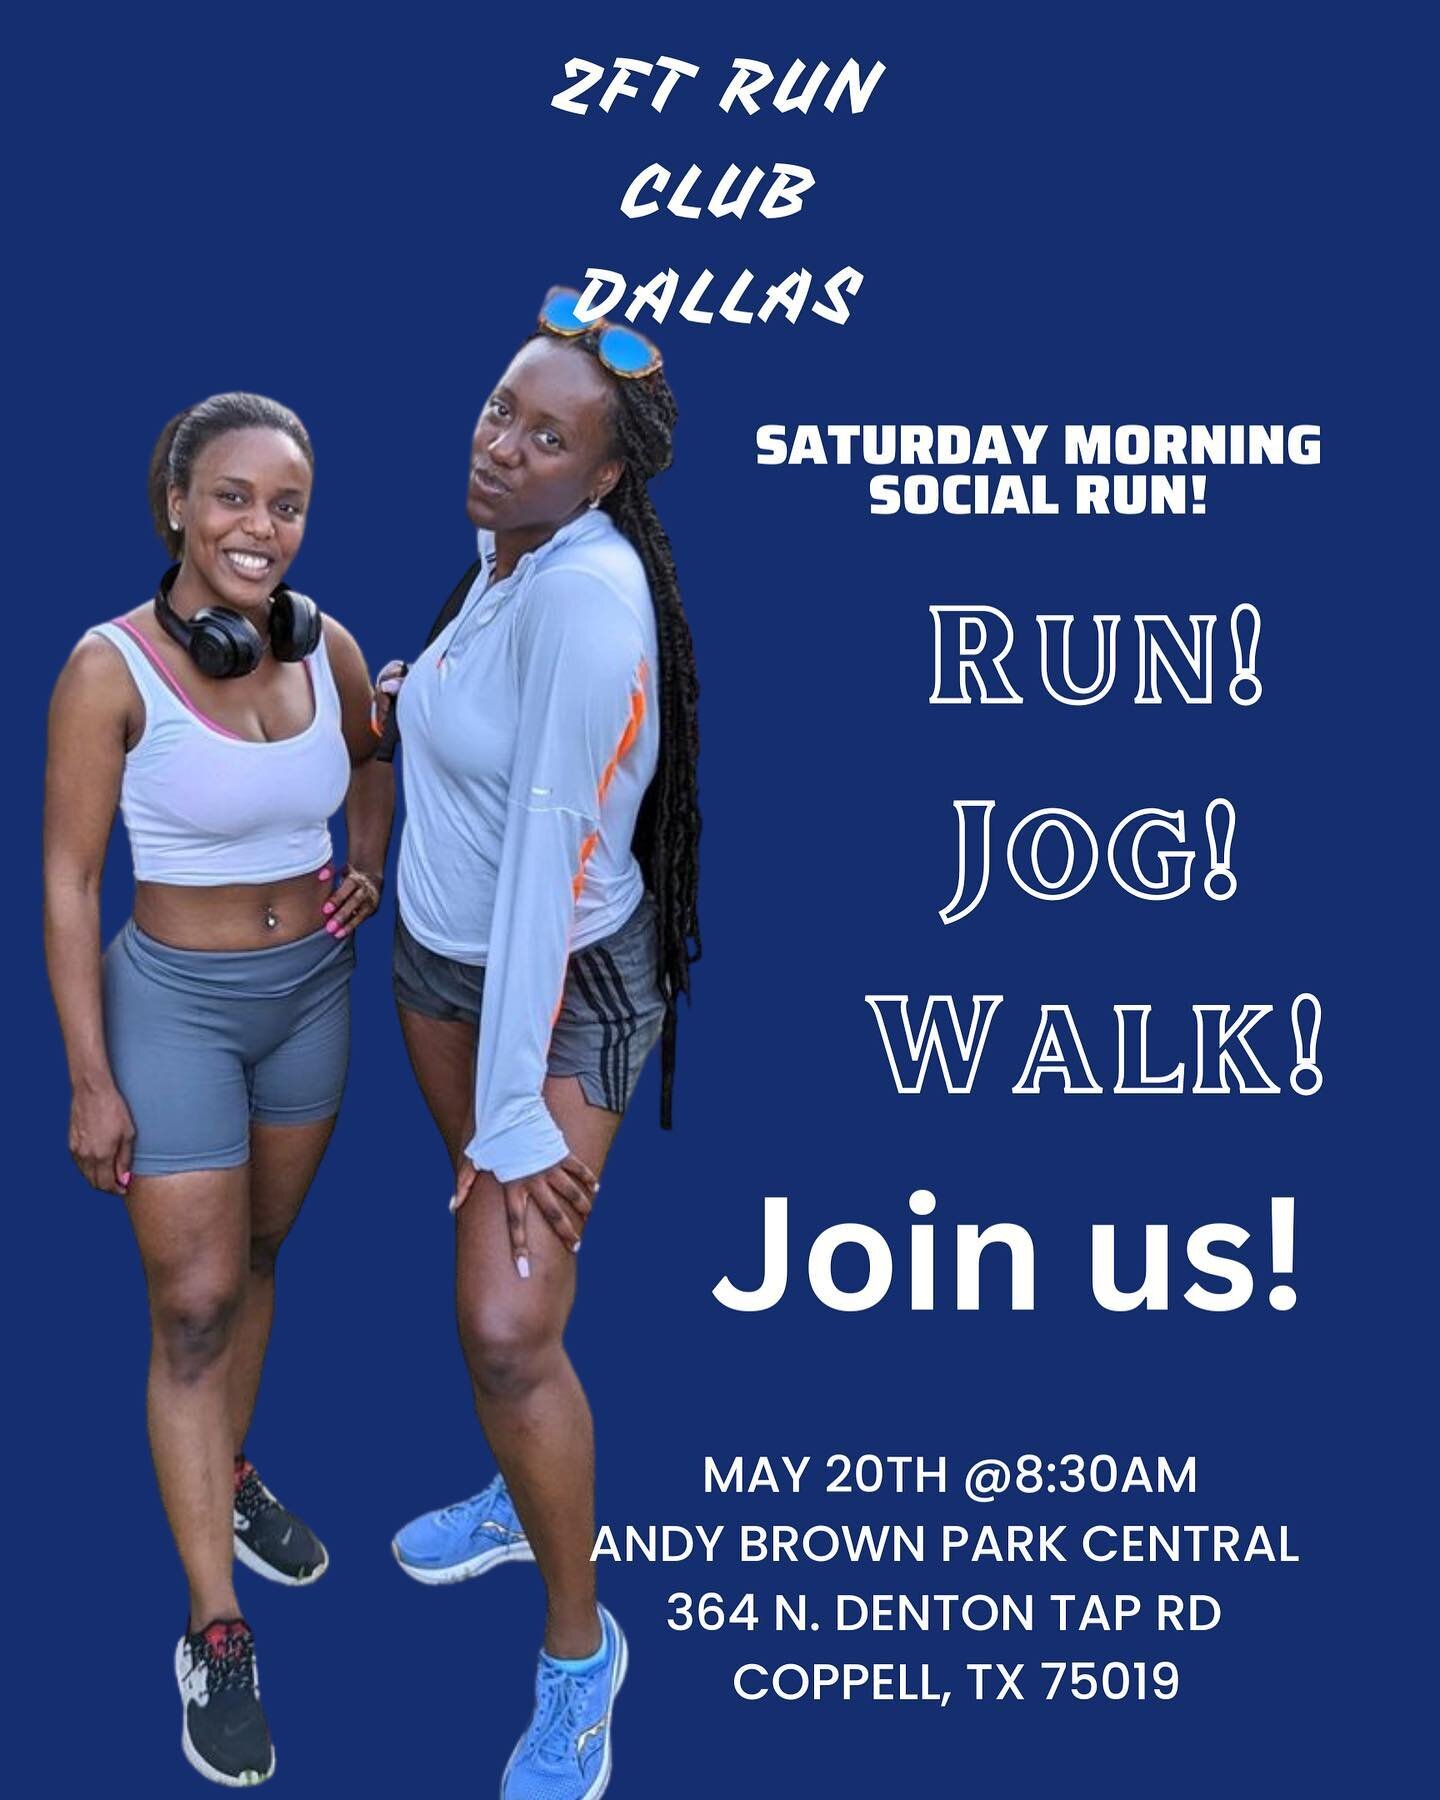 Come join the Zquad for our Saturday Morning Easy Pace Run, Jog, or Walk! 

First timers please fill out the waiver in the bio! 

All running levels welcomed!

See you all Saturday!

40 minute easy pace run, jog, or walk! 

#weboutdemmiles #goodmorni